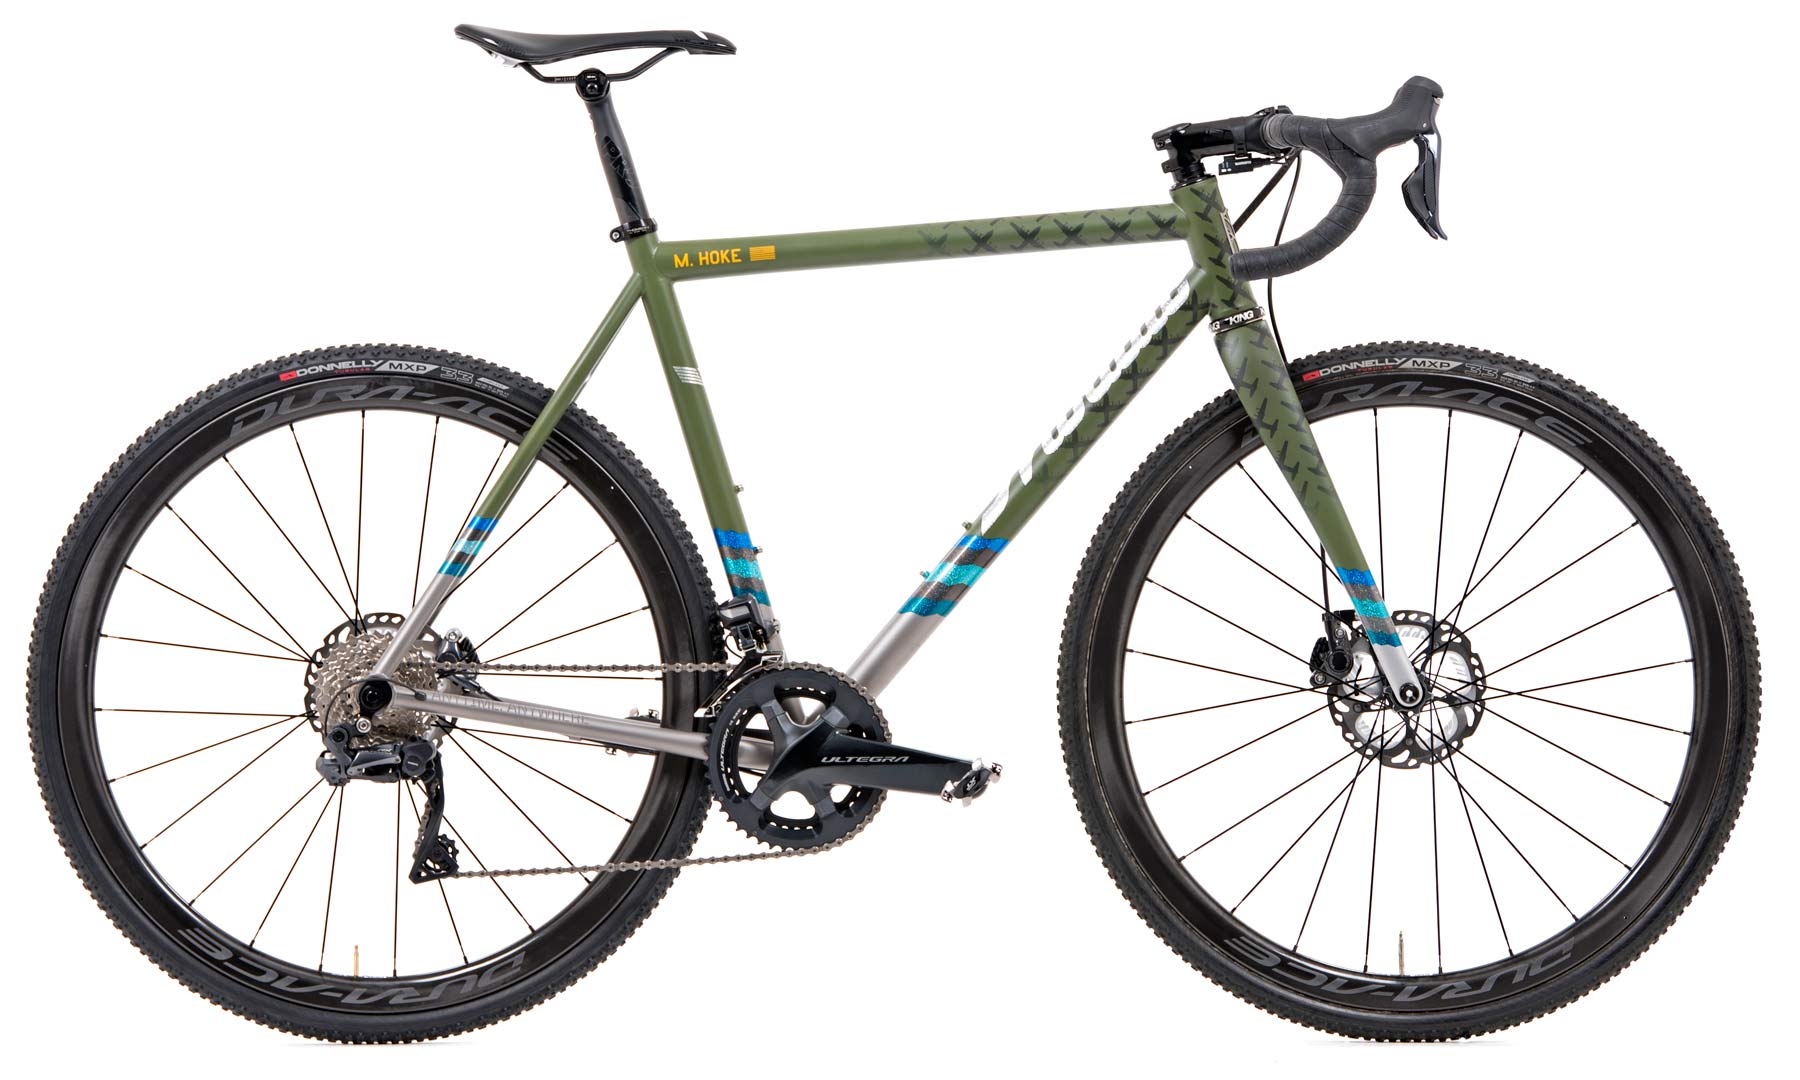 Mosaic XT-1 ti titanium CX cyclocross cross bike advocating fundraising for the Wounded Warrior Project